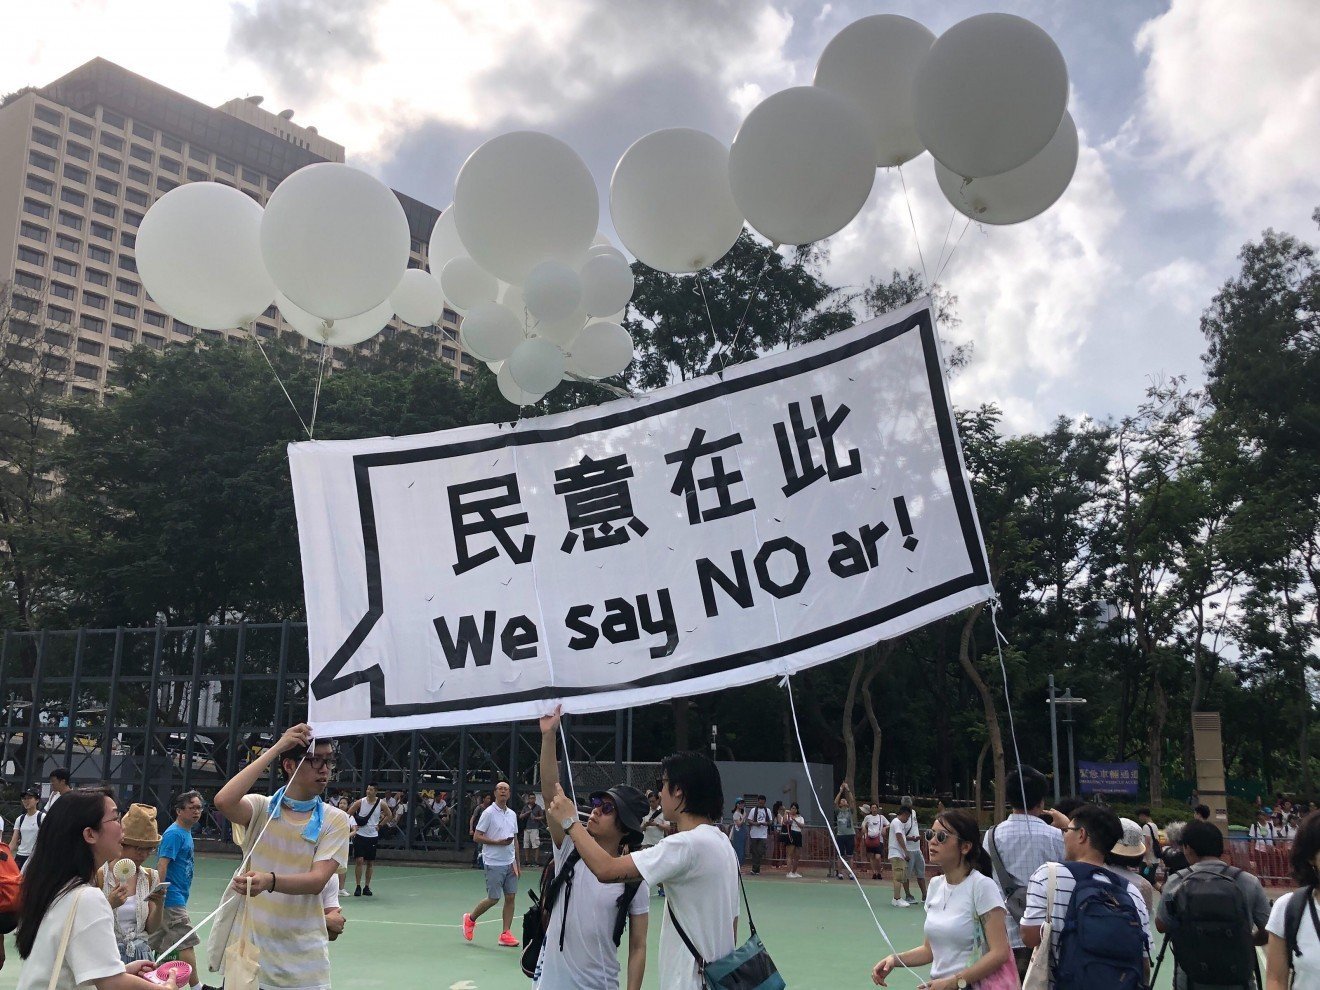 Hongkongers can say “no” to misinformation, whether they oppose the extradition bill – as expressed in this banner by artists Alcohol Salon – or not. Photo: Handout